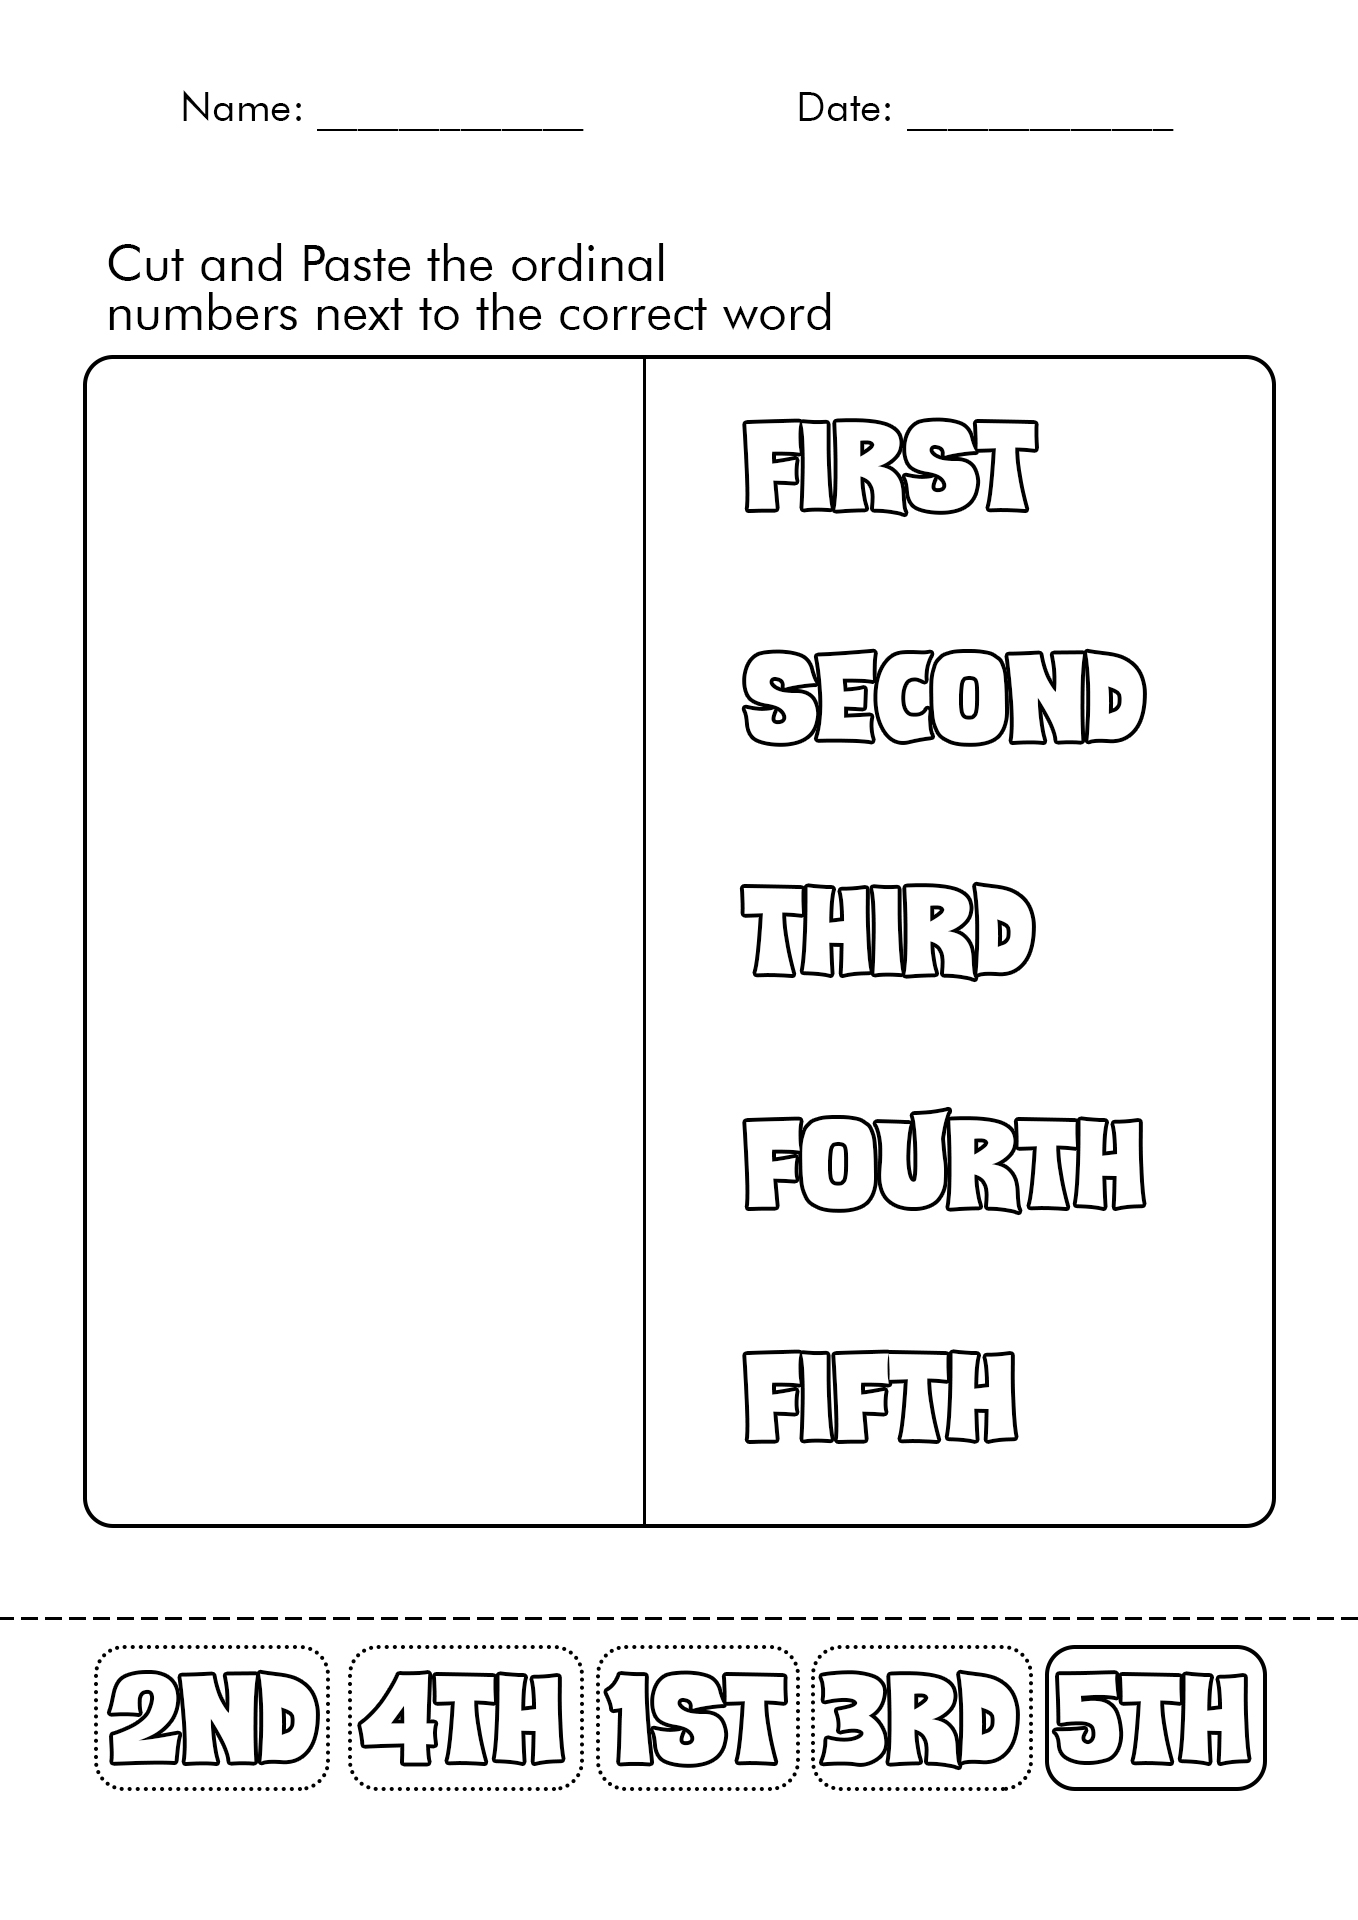 Ordinal Numbers Cut and Paste